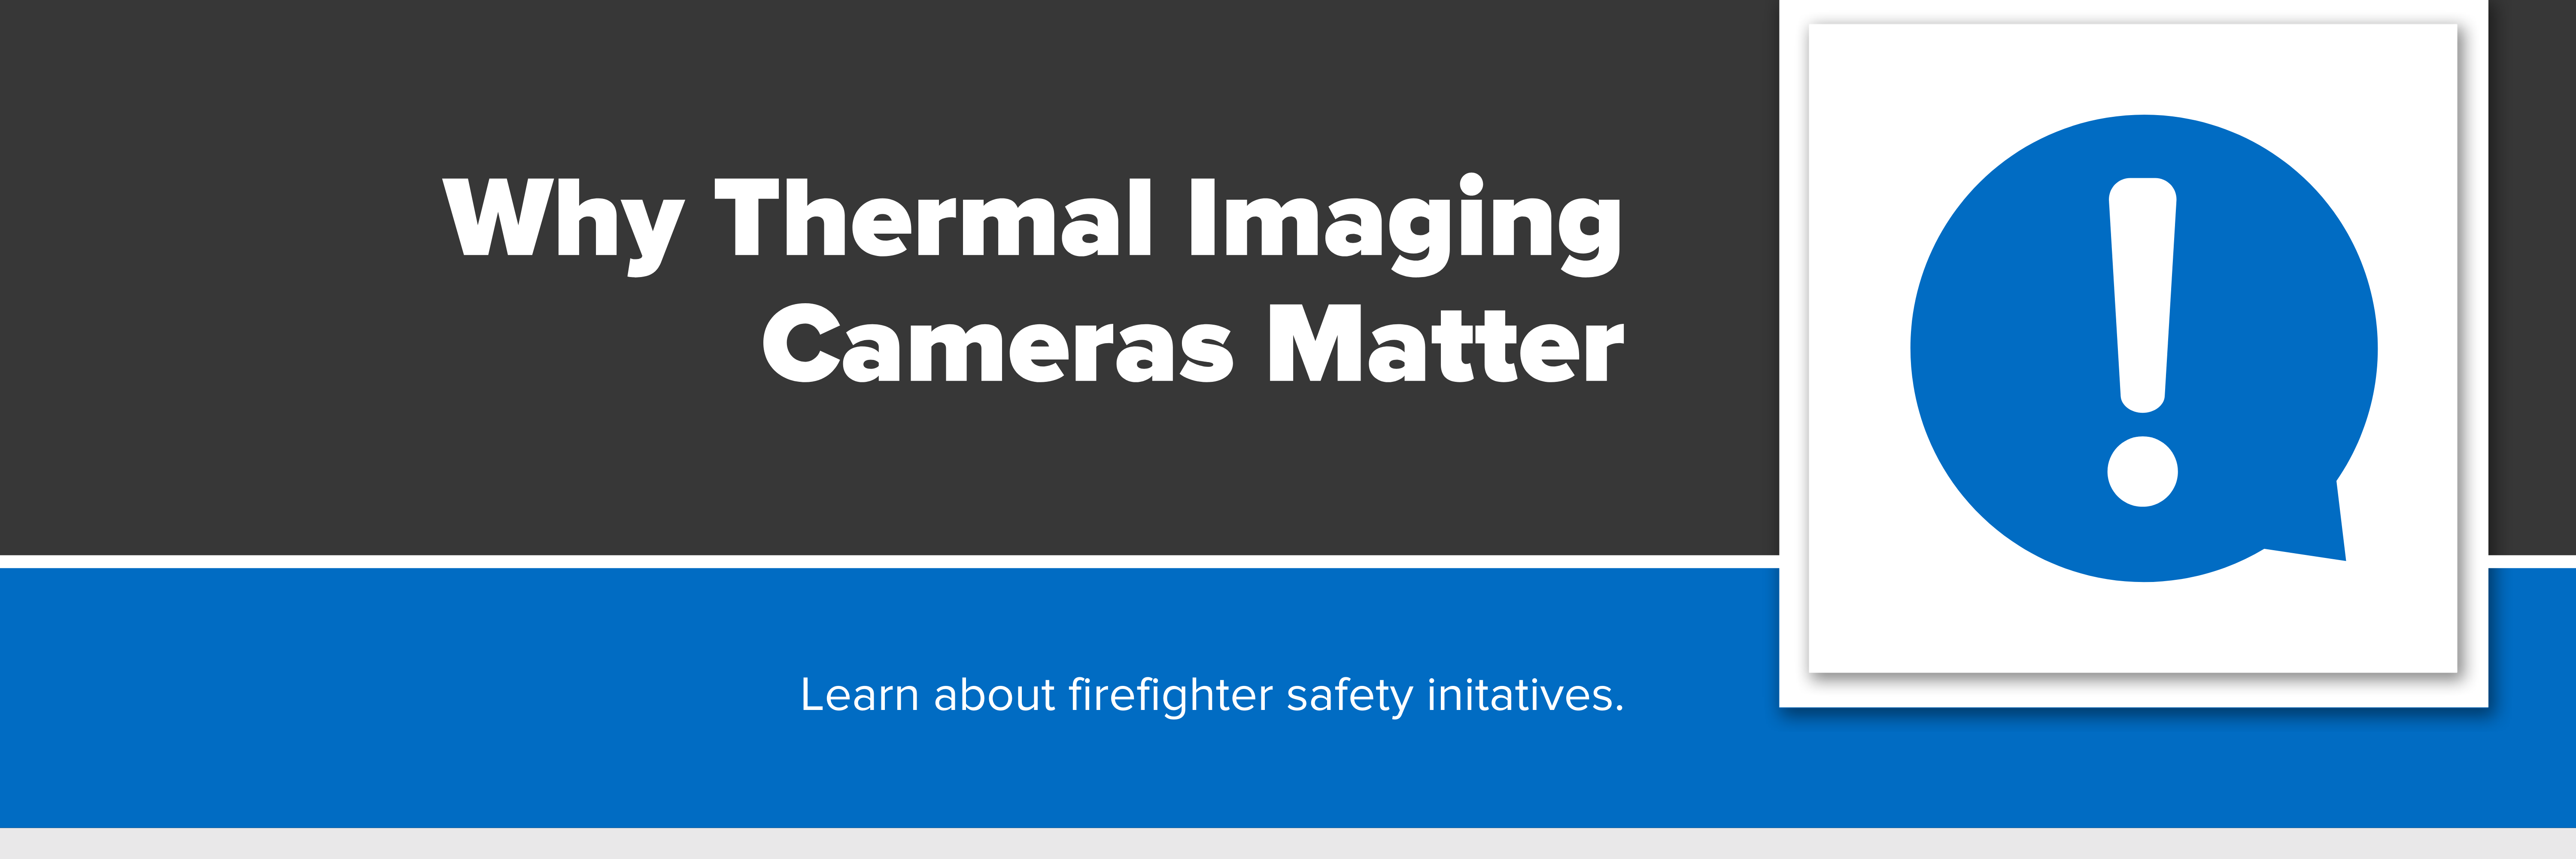 Header image with text "Why Thermal Imaging Cameras Matter"